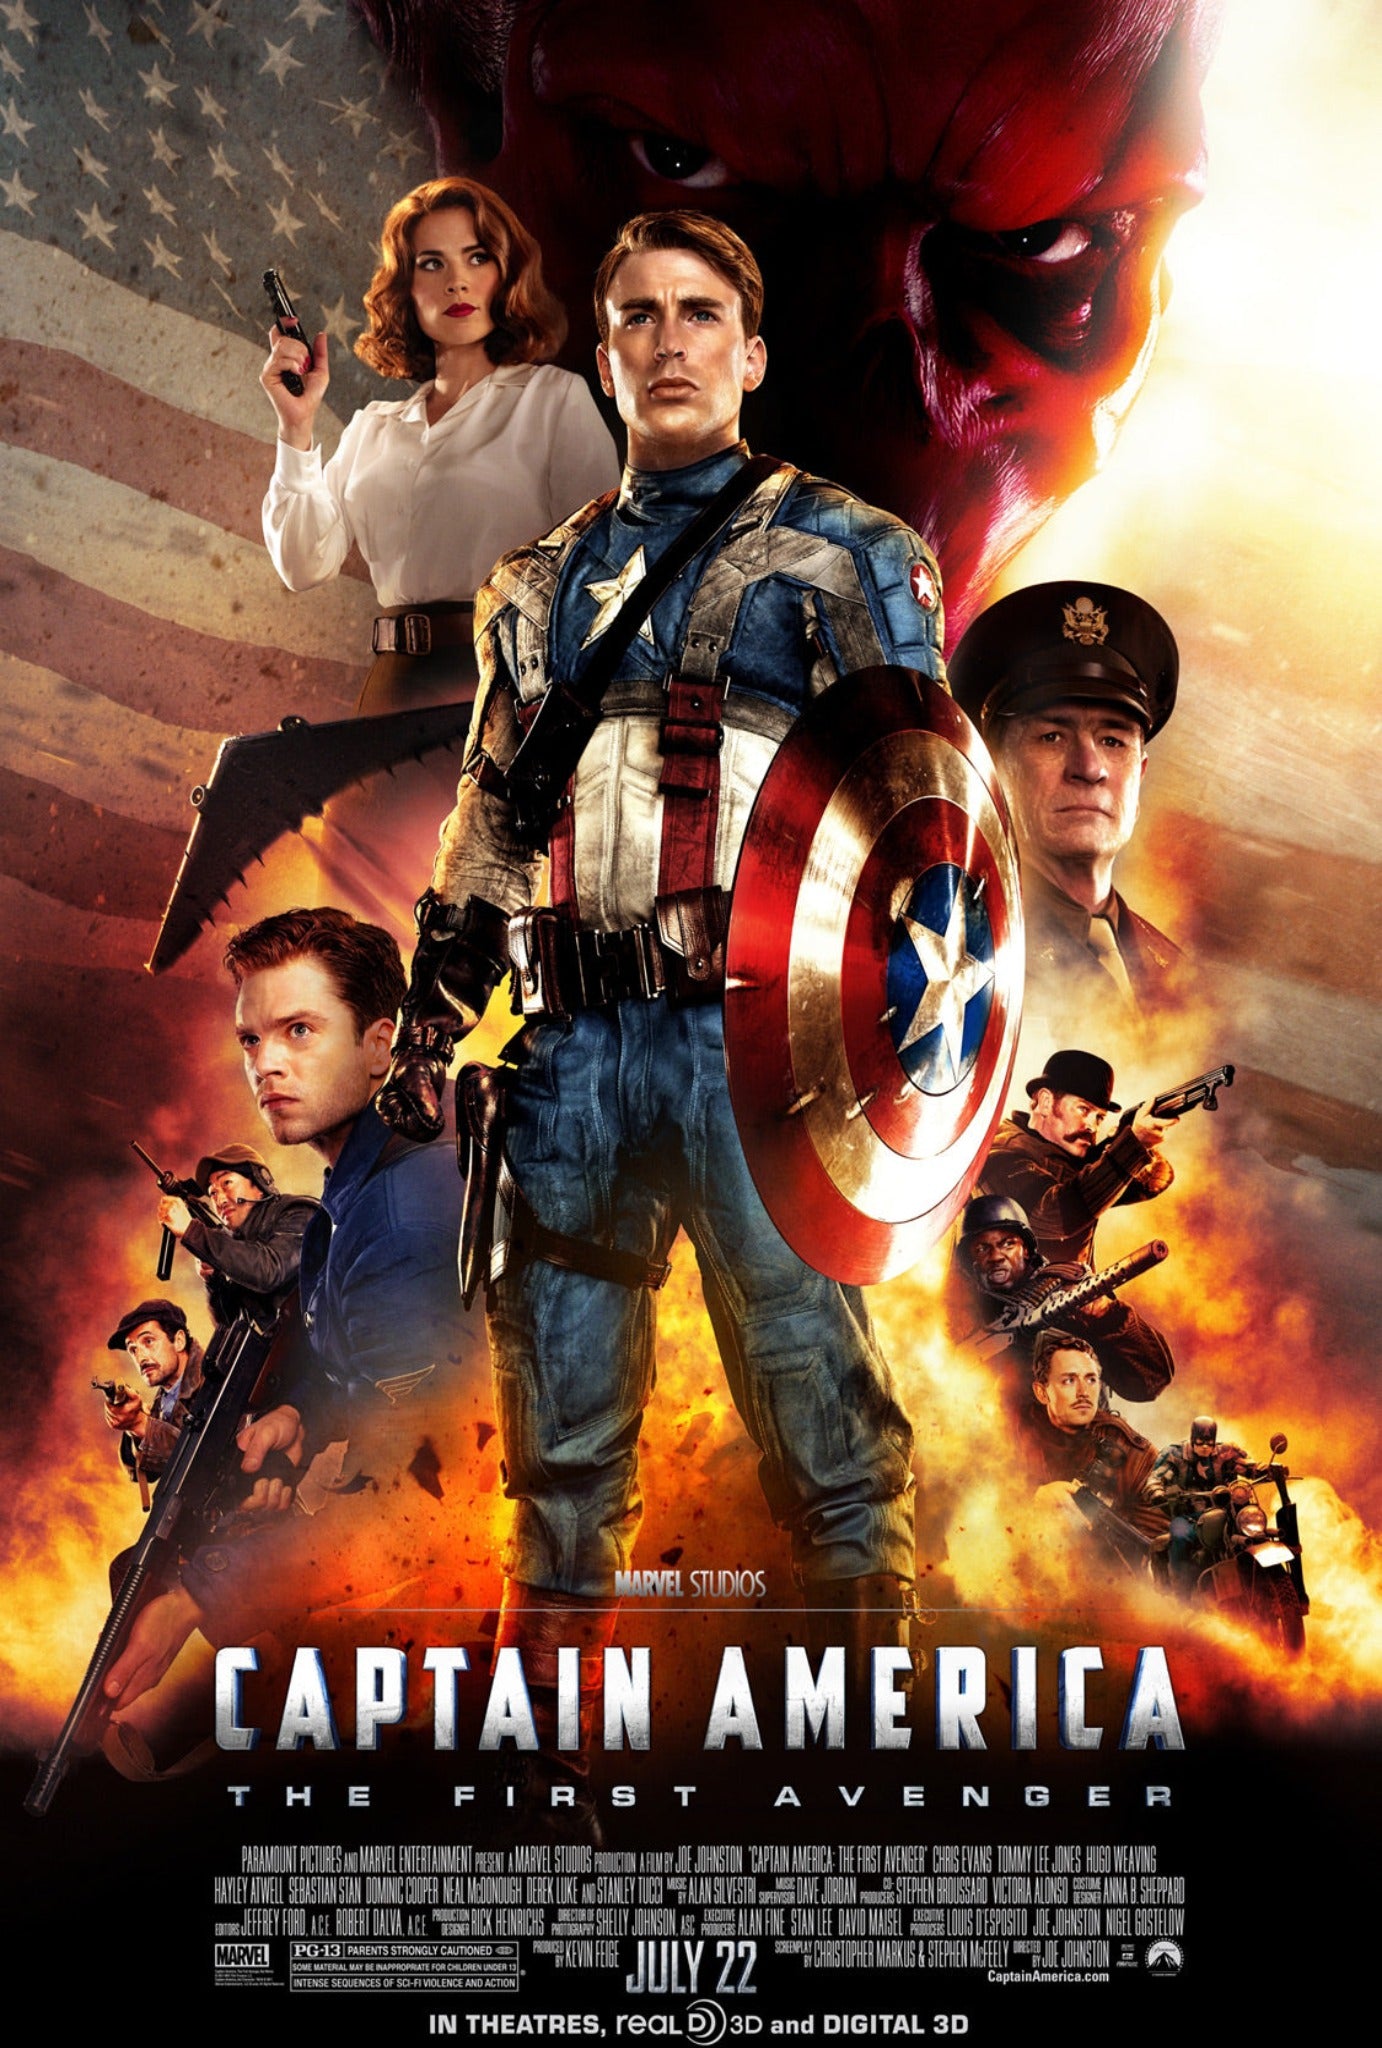 Captain America The First Avenger 2011 | Action | Sci-fi | 2h 4m | 82% liked this film Google users | 1080p MP4 | Digital Download